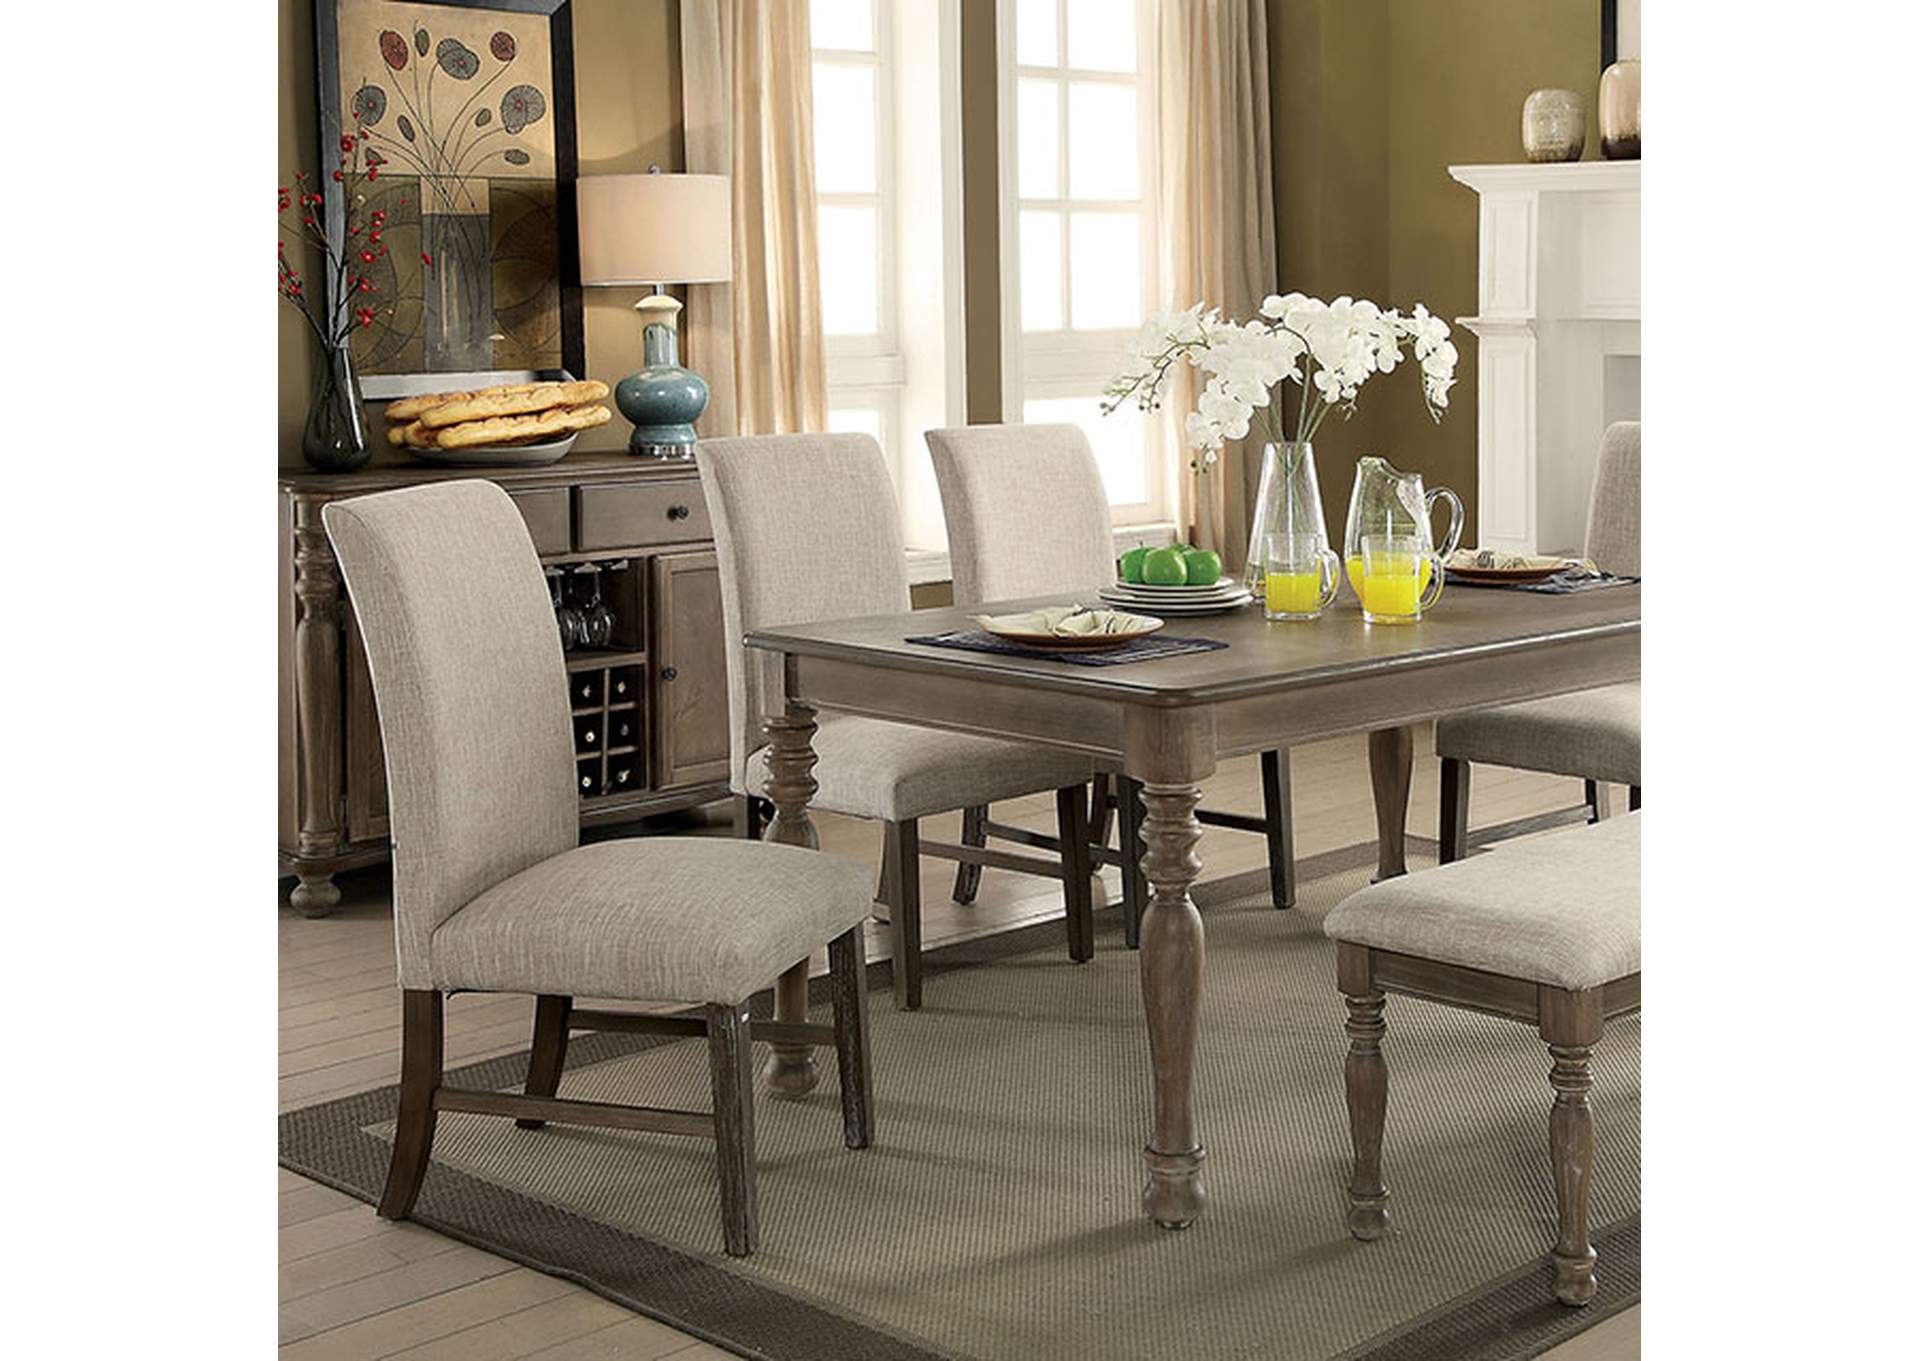 Siobhan Dining Table,Furniture of America